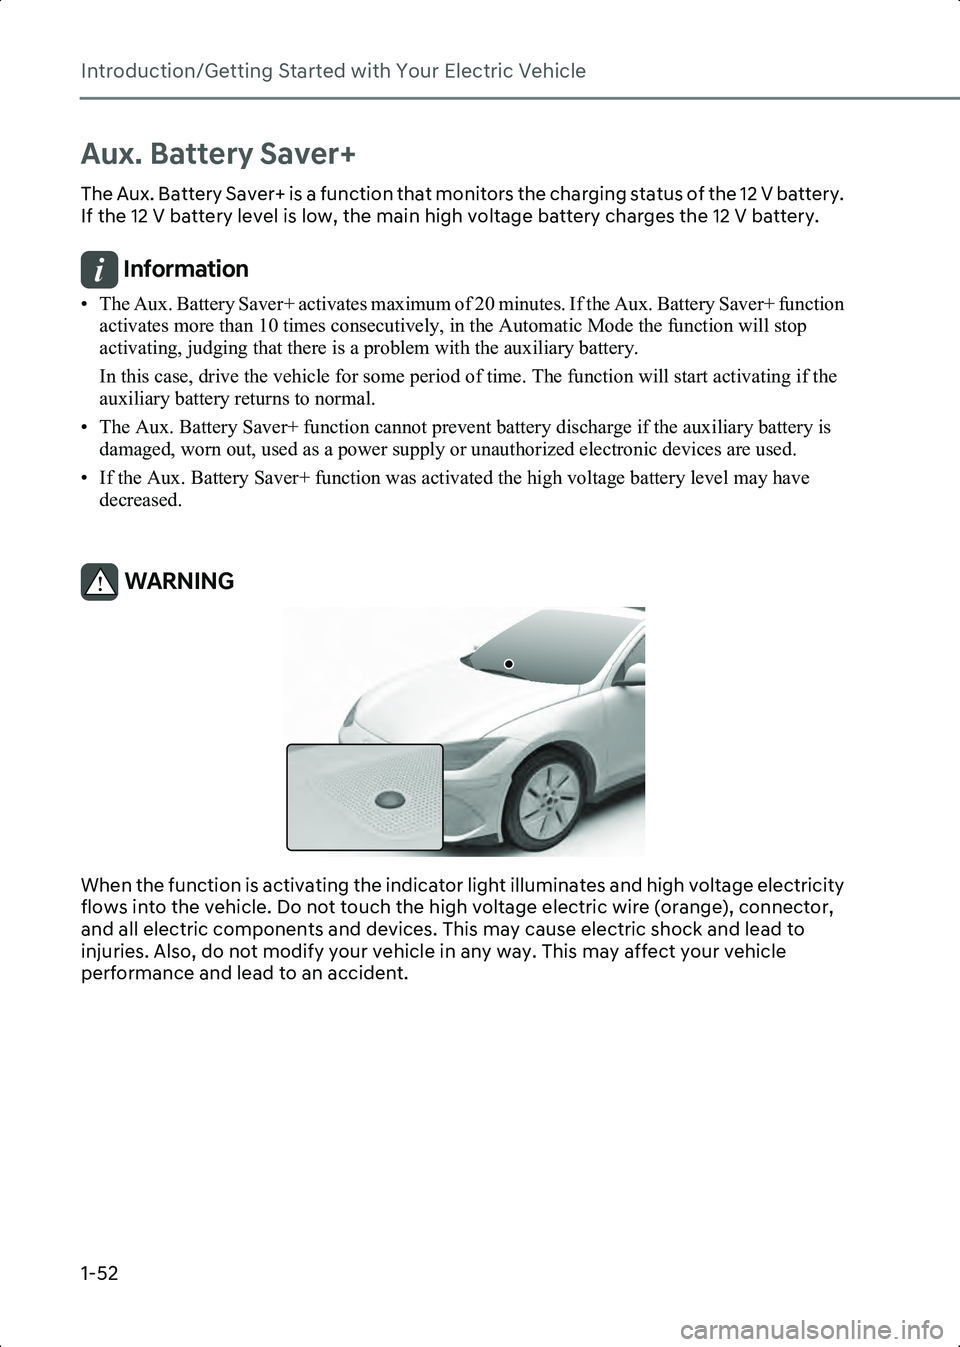 HYUNDAI IONIQ 6 2023  Owners Manual Introduction/Getting Started with Your Electric Vehicle
1-52
Aux. Battery Saver+
The Aux. Battery Saver+ is a function that monitors the charging status of the 12 V battery. 
If the 12 V battery level